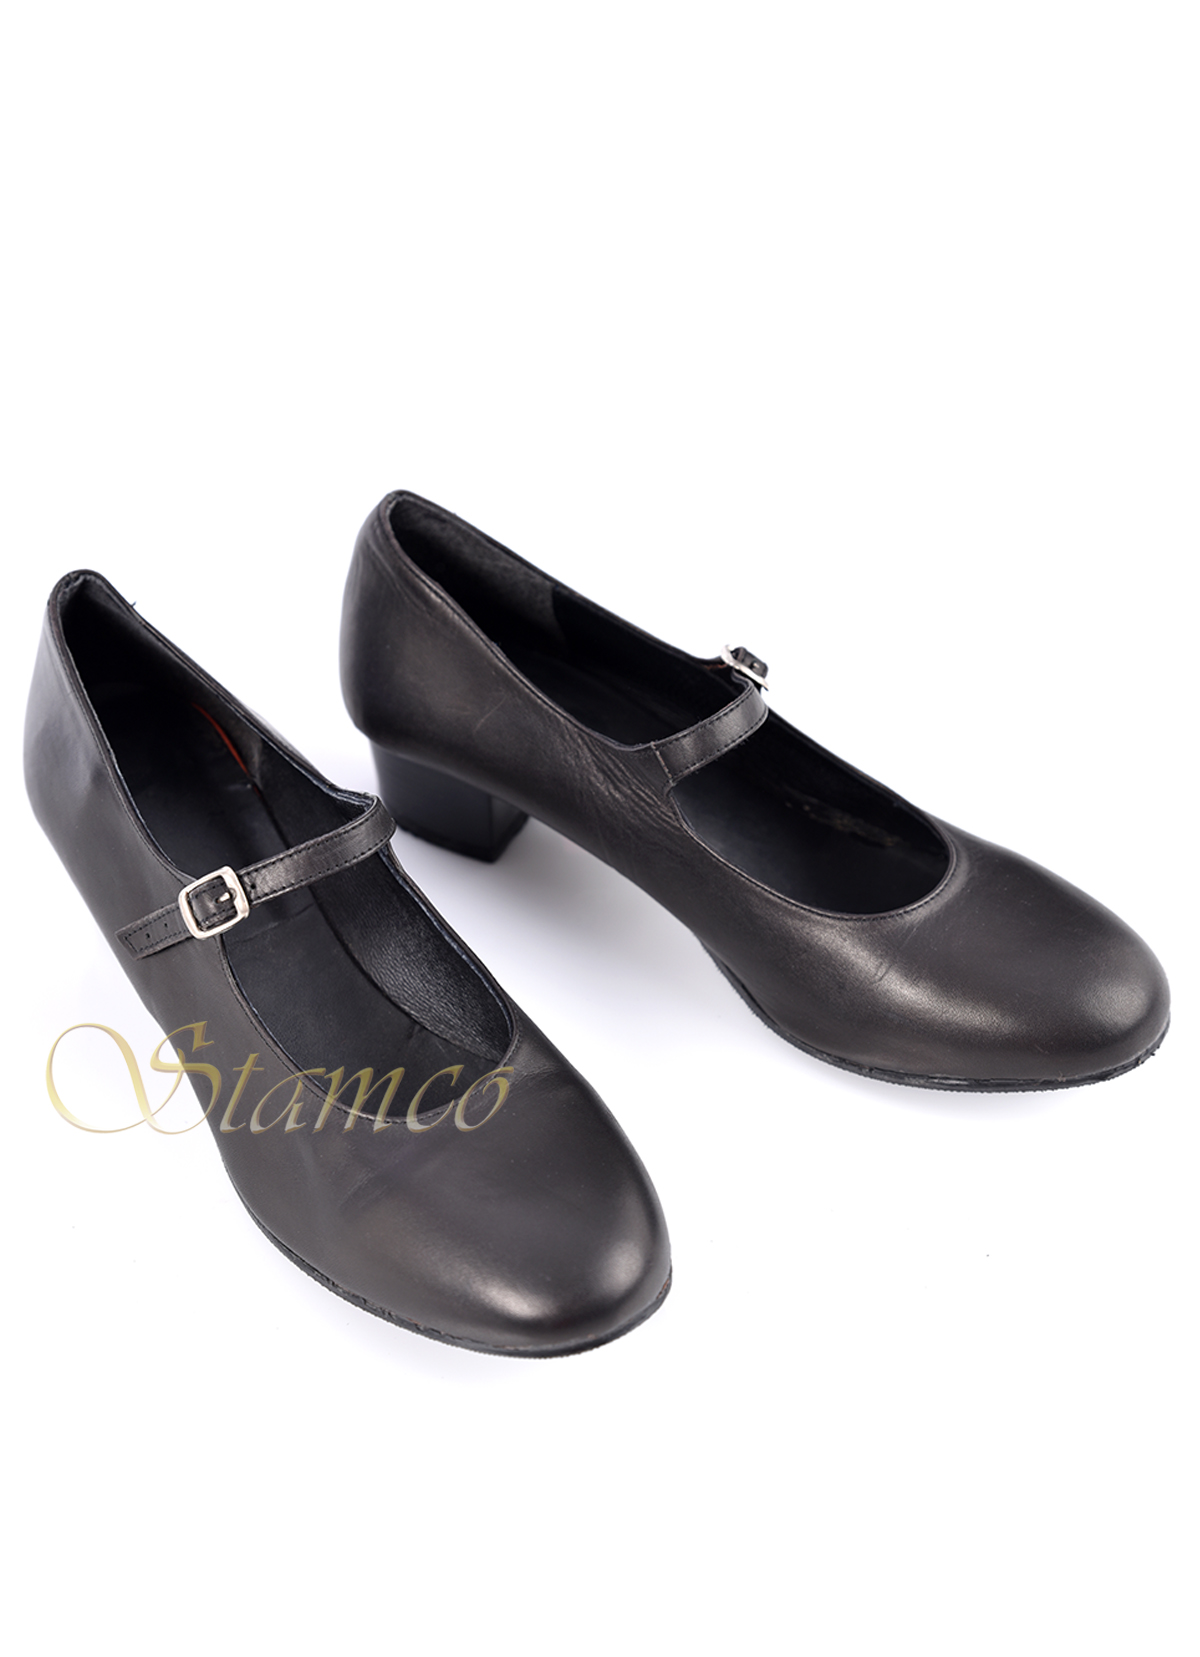 Professional Heeled Latin Dance Shoes London For Women 5cm/7cm Tango,  Ballroom, Latin Dance, Salsa Ideal For Girls And Ladies From Sport_company,  $16.81 | DHgate.Com